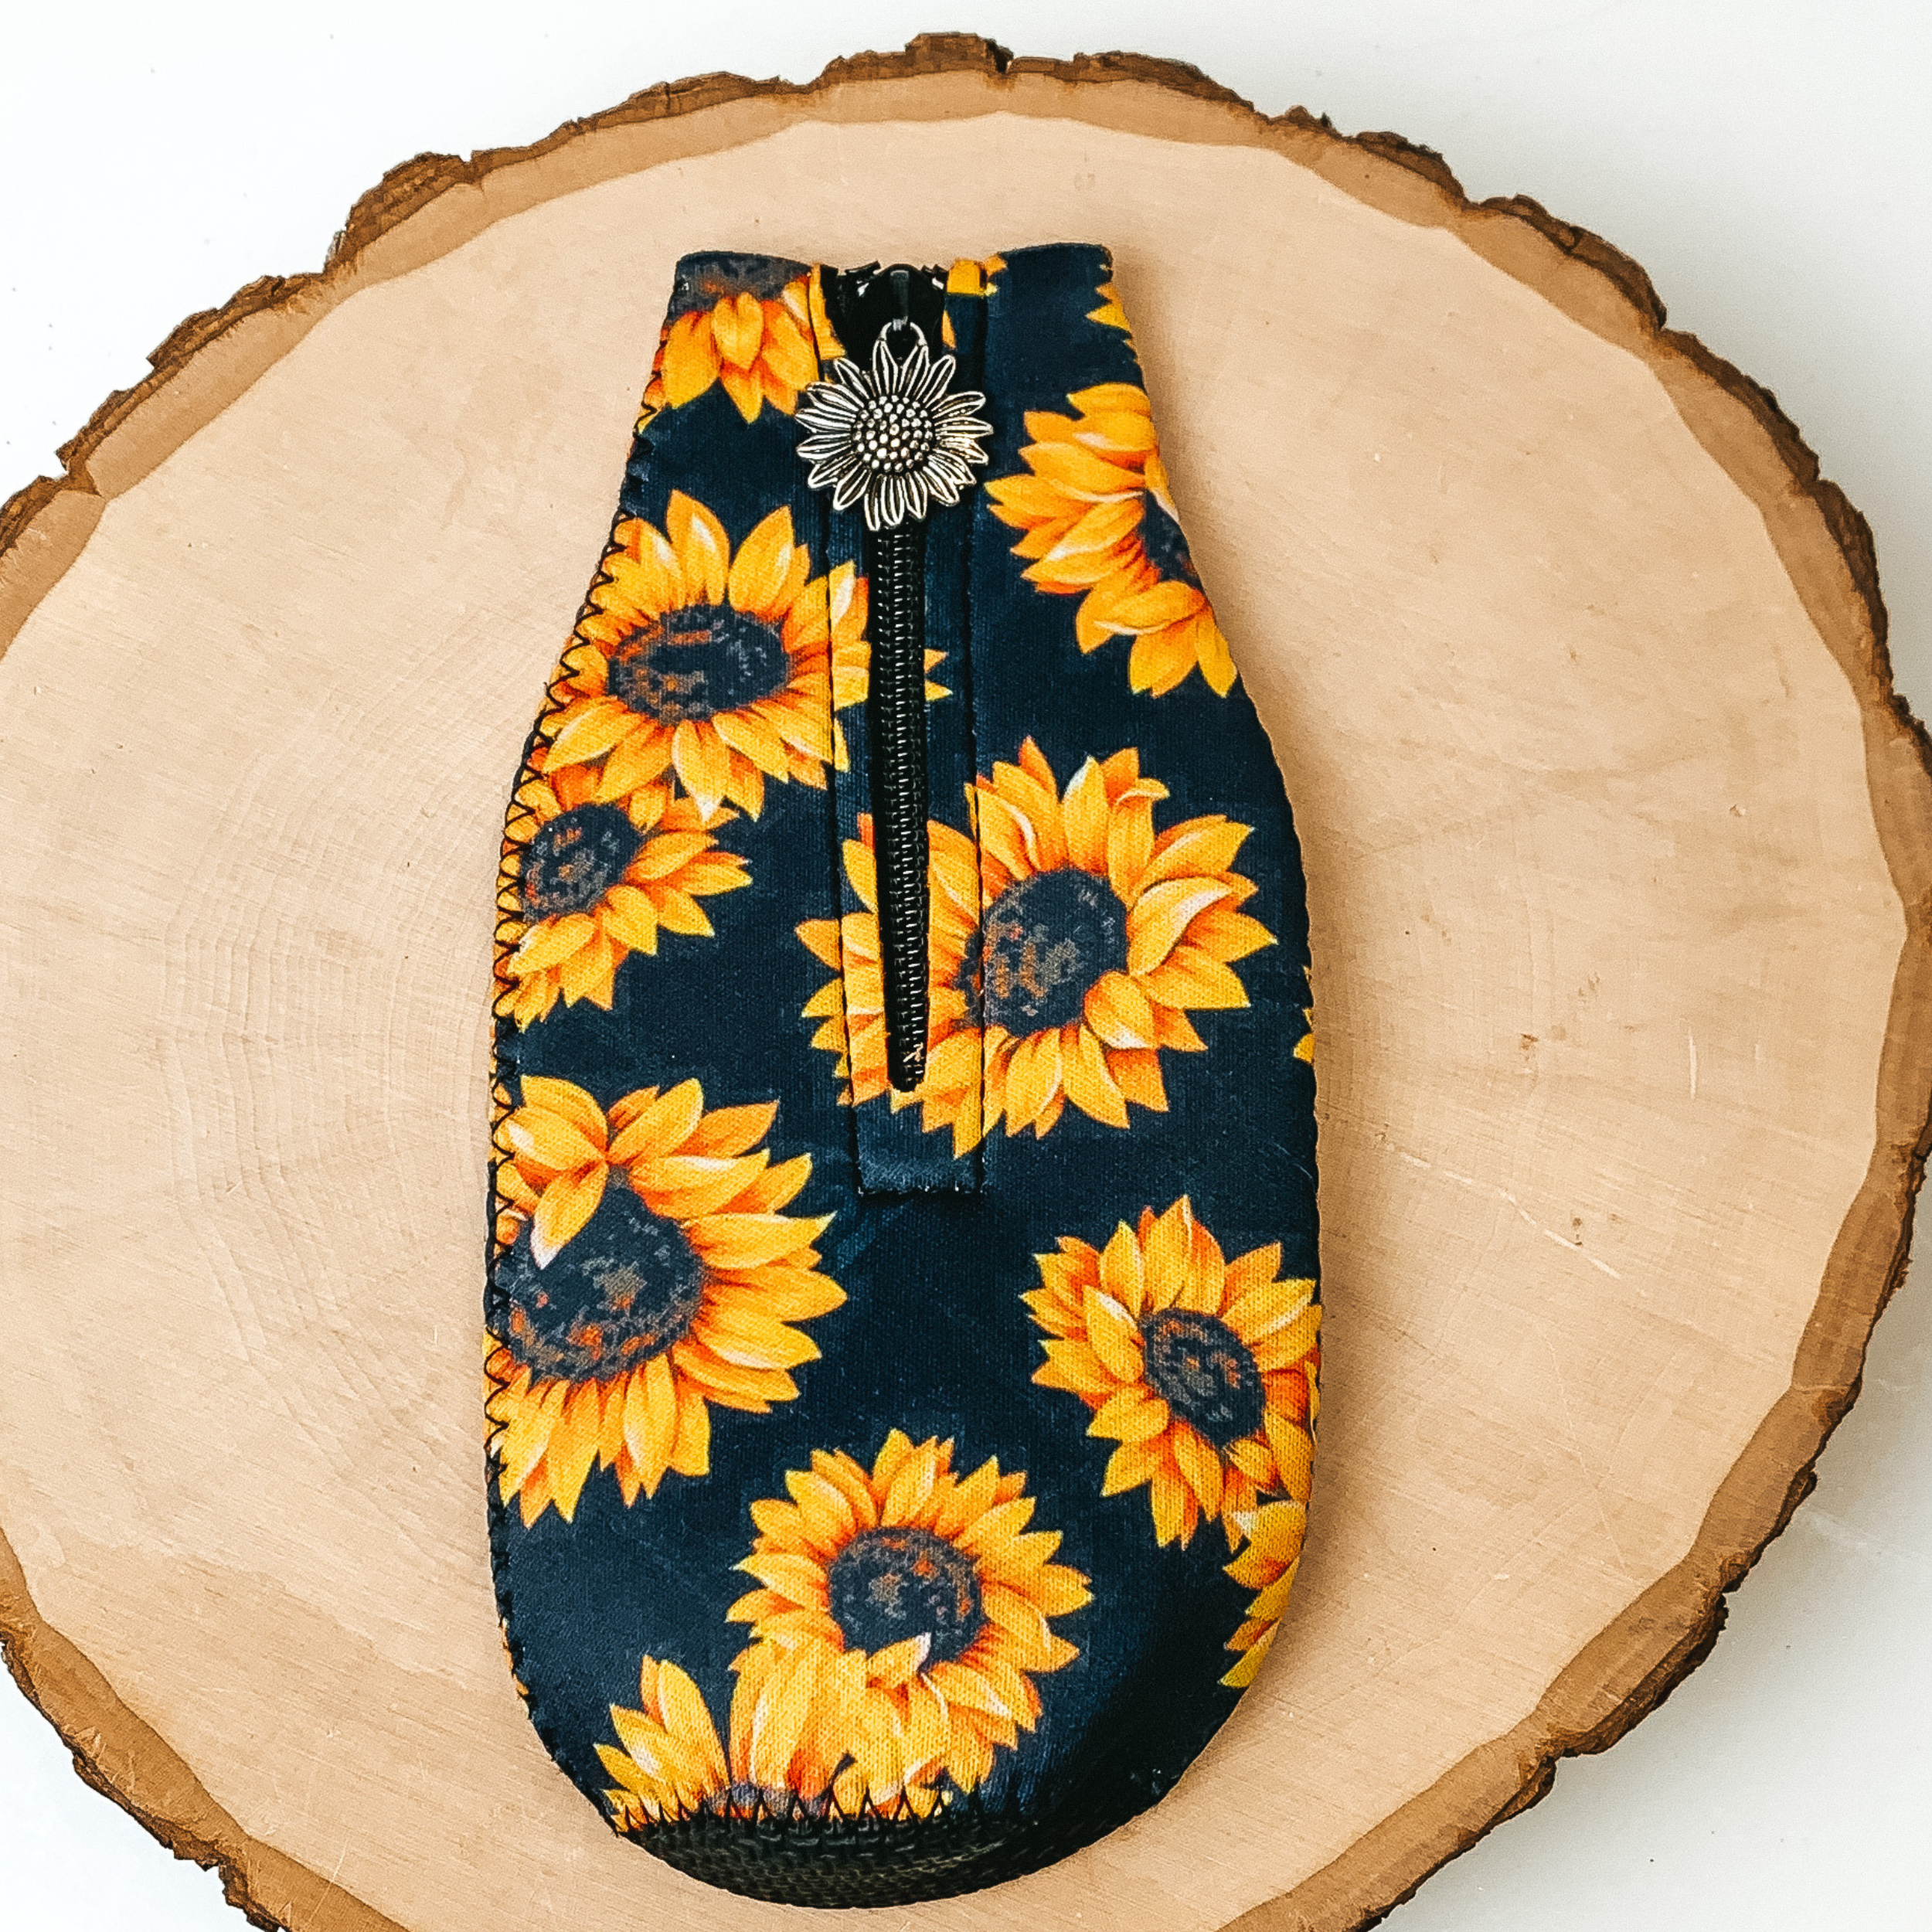 This Sunflower Print Zip Up kooozie With Sunflower Charm is pictured on a peice of wood, with a white background.  